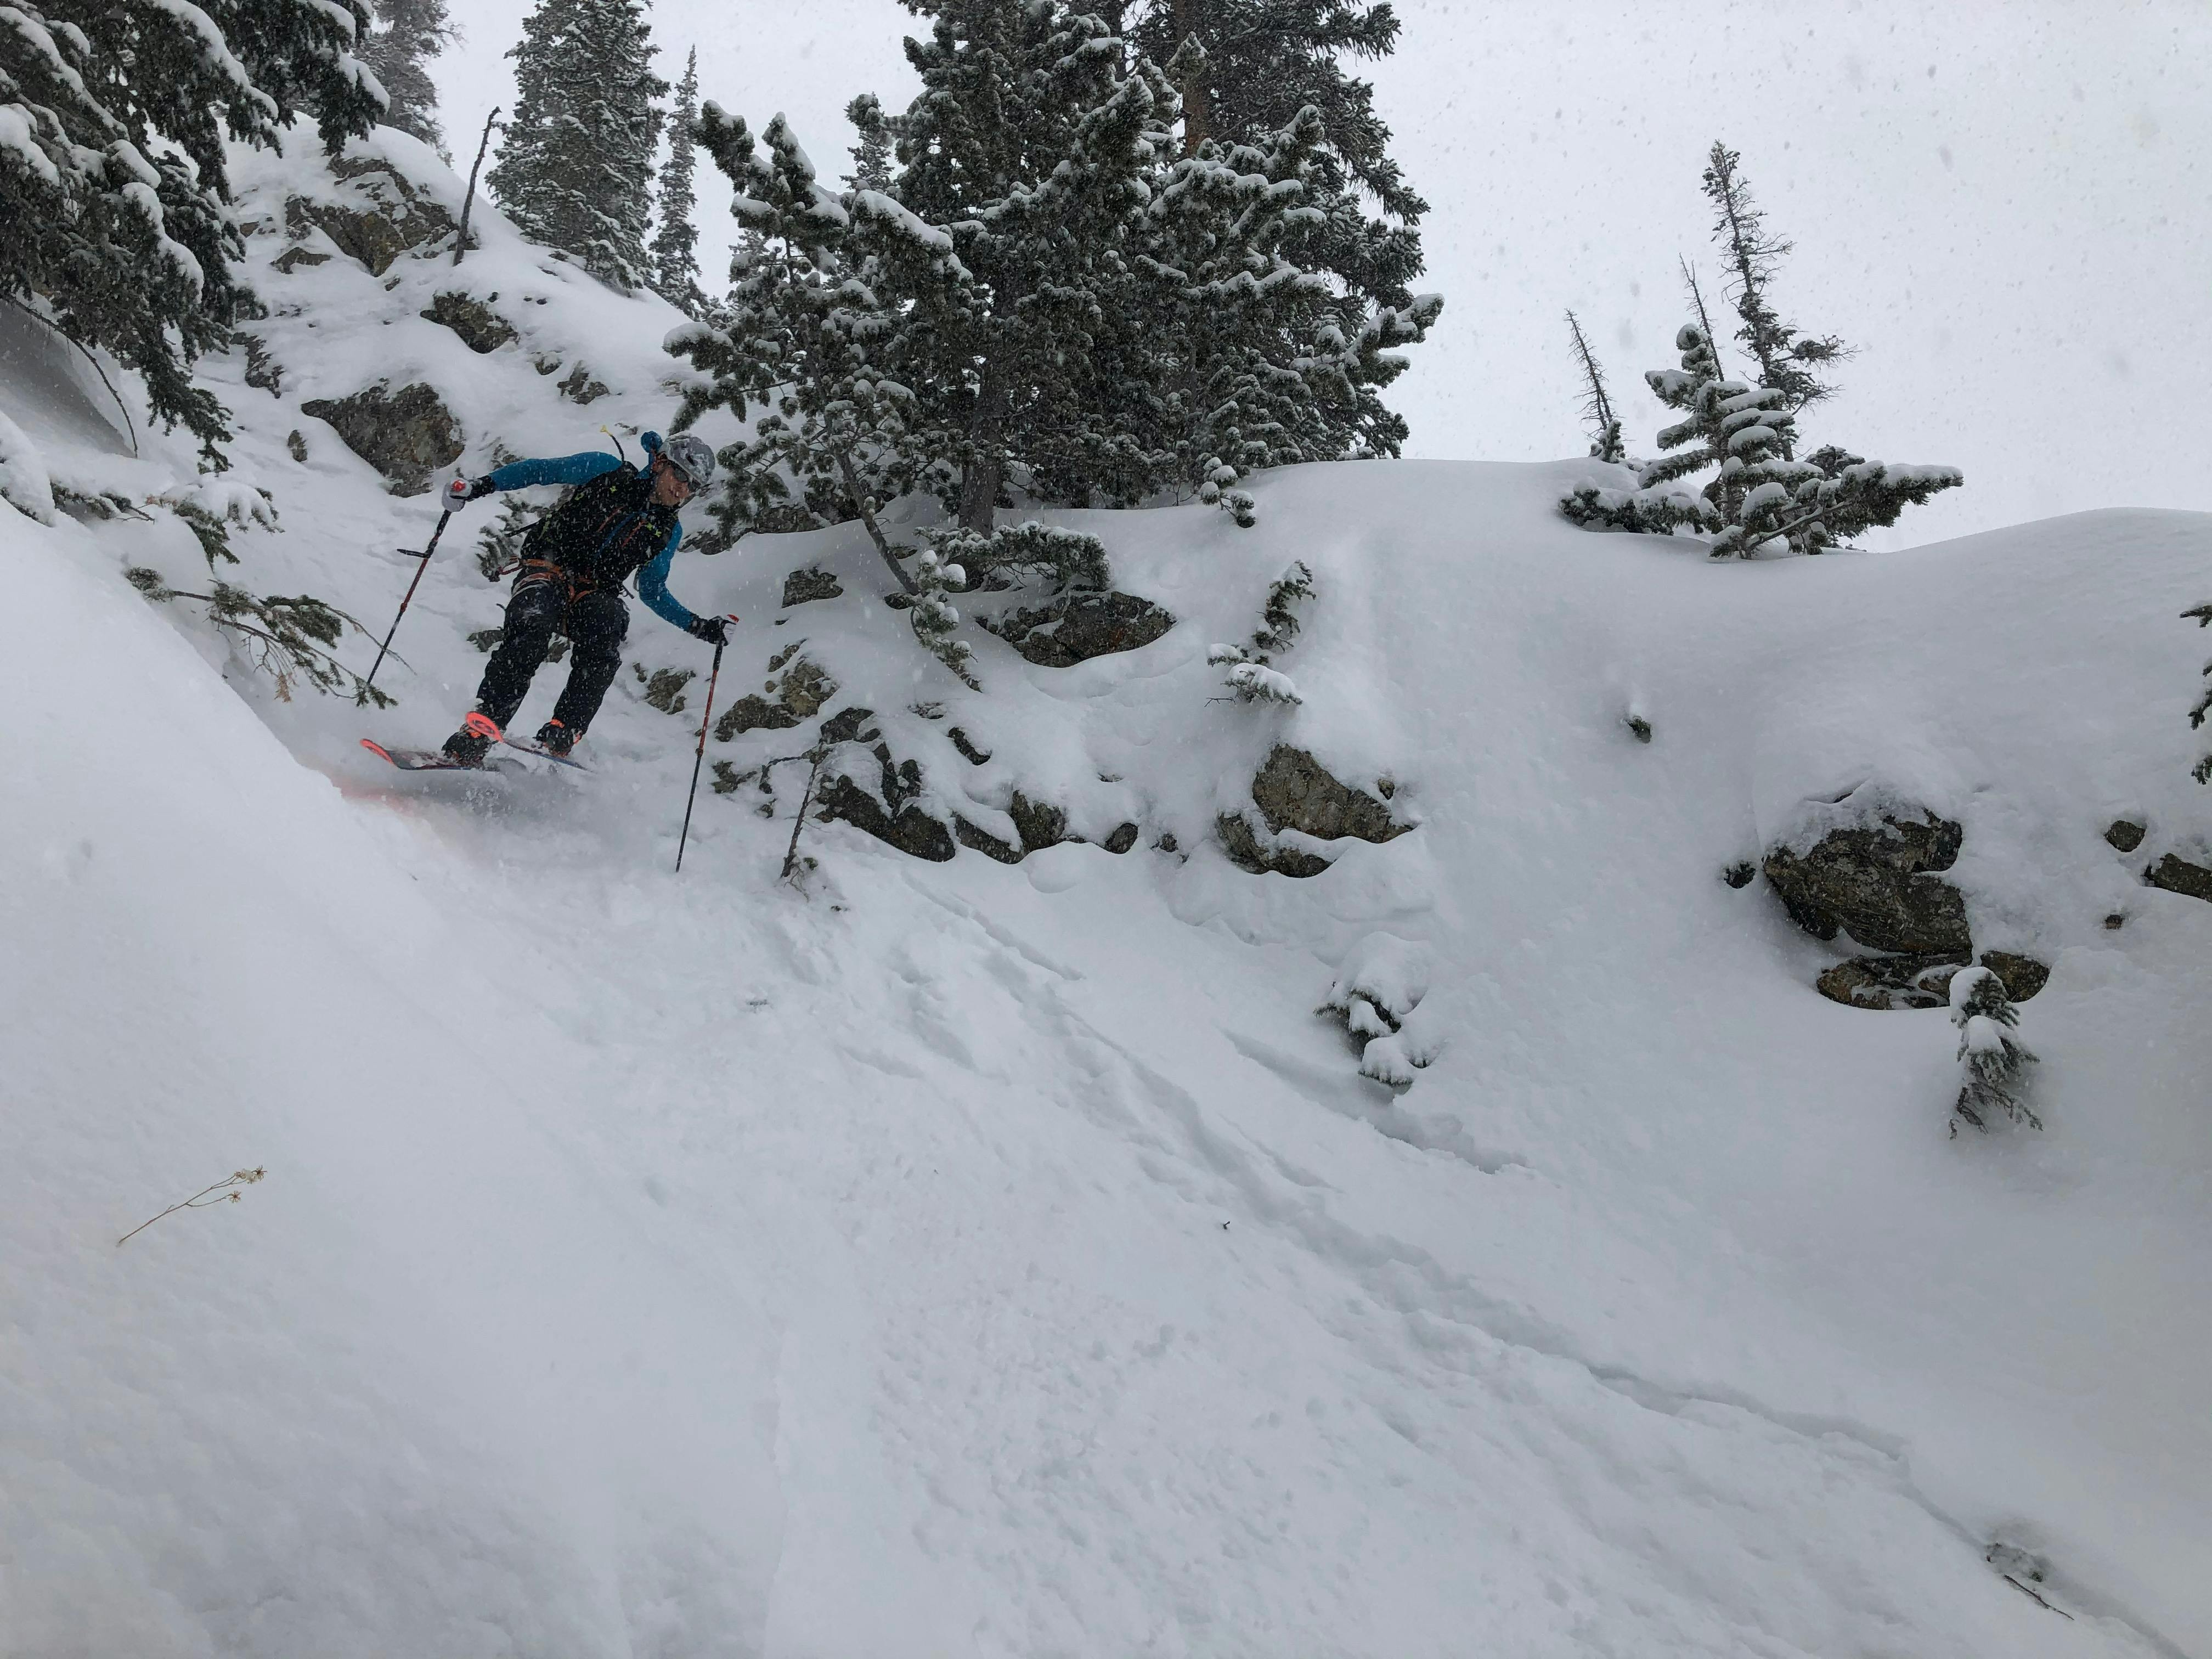 A skier heading down a steep slope in the backcountry on a cloudy day